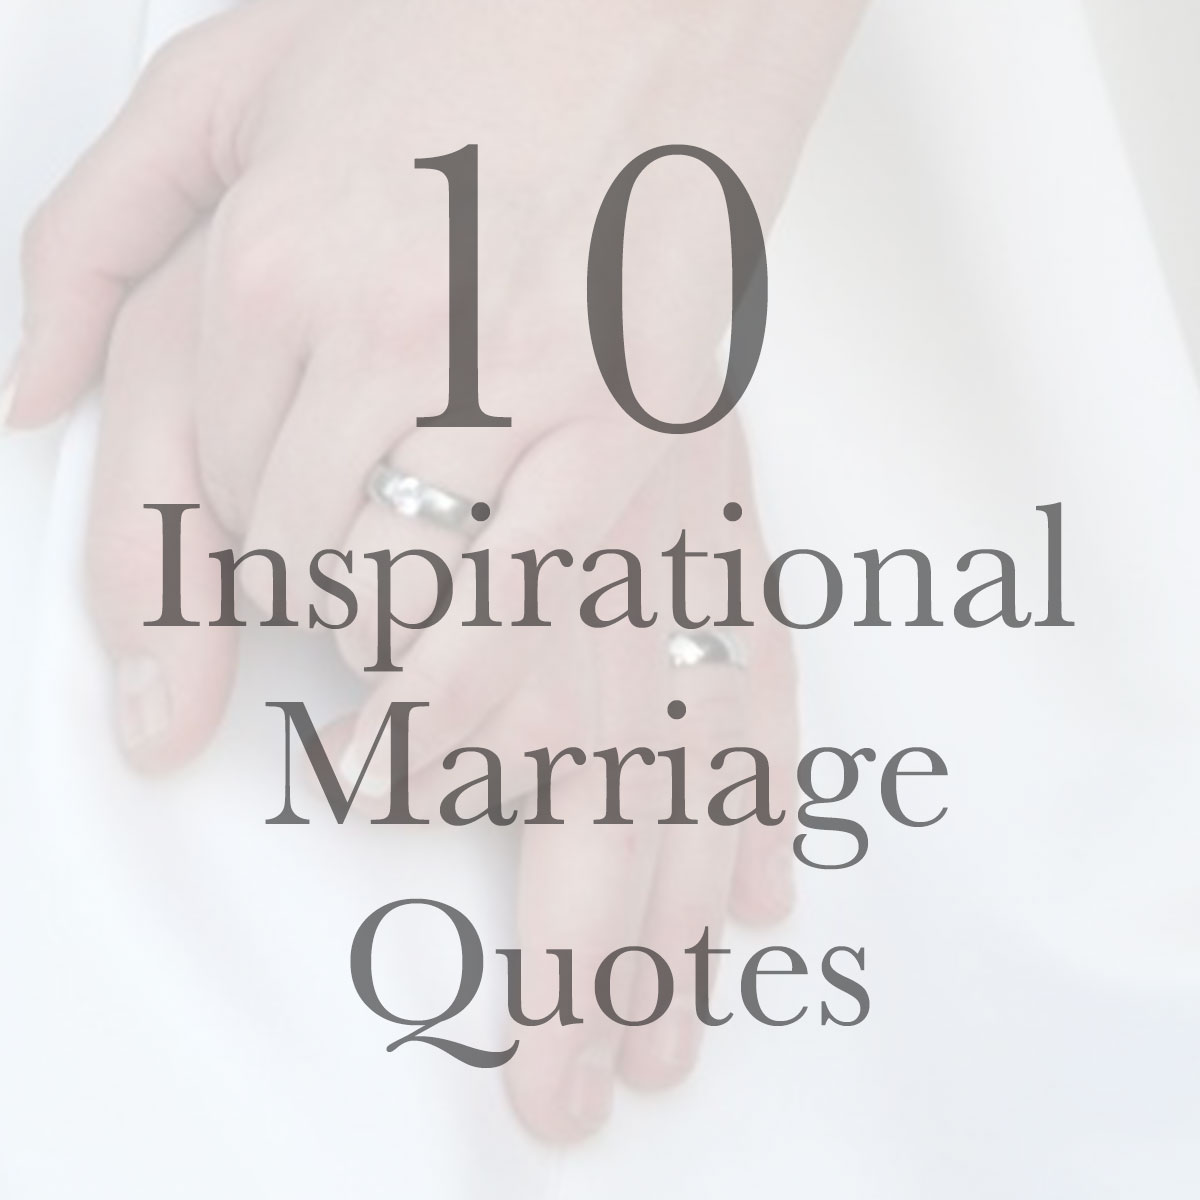 Getting Married Quotes. QuotesGram